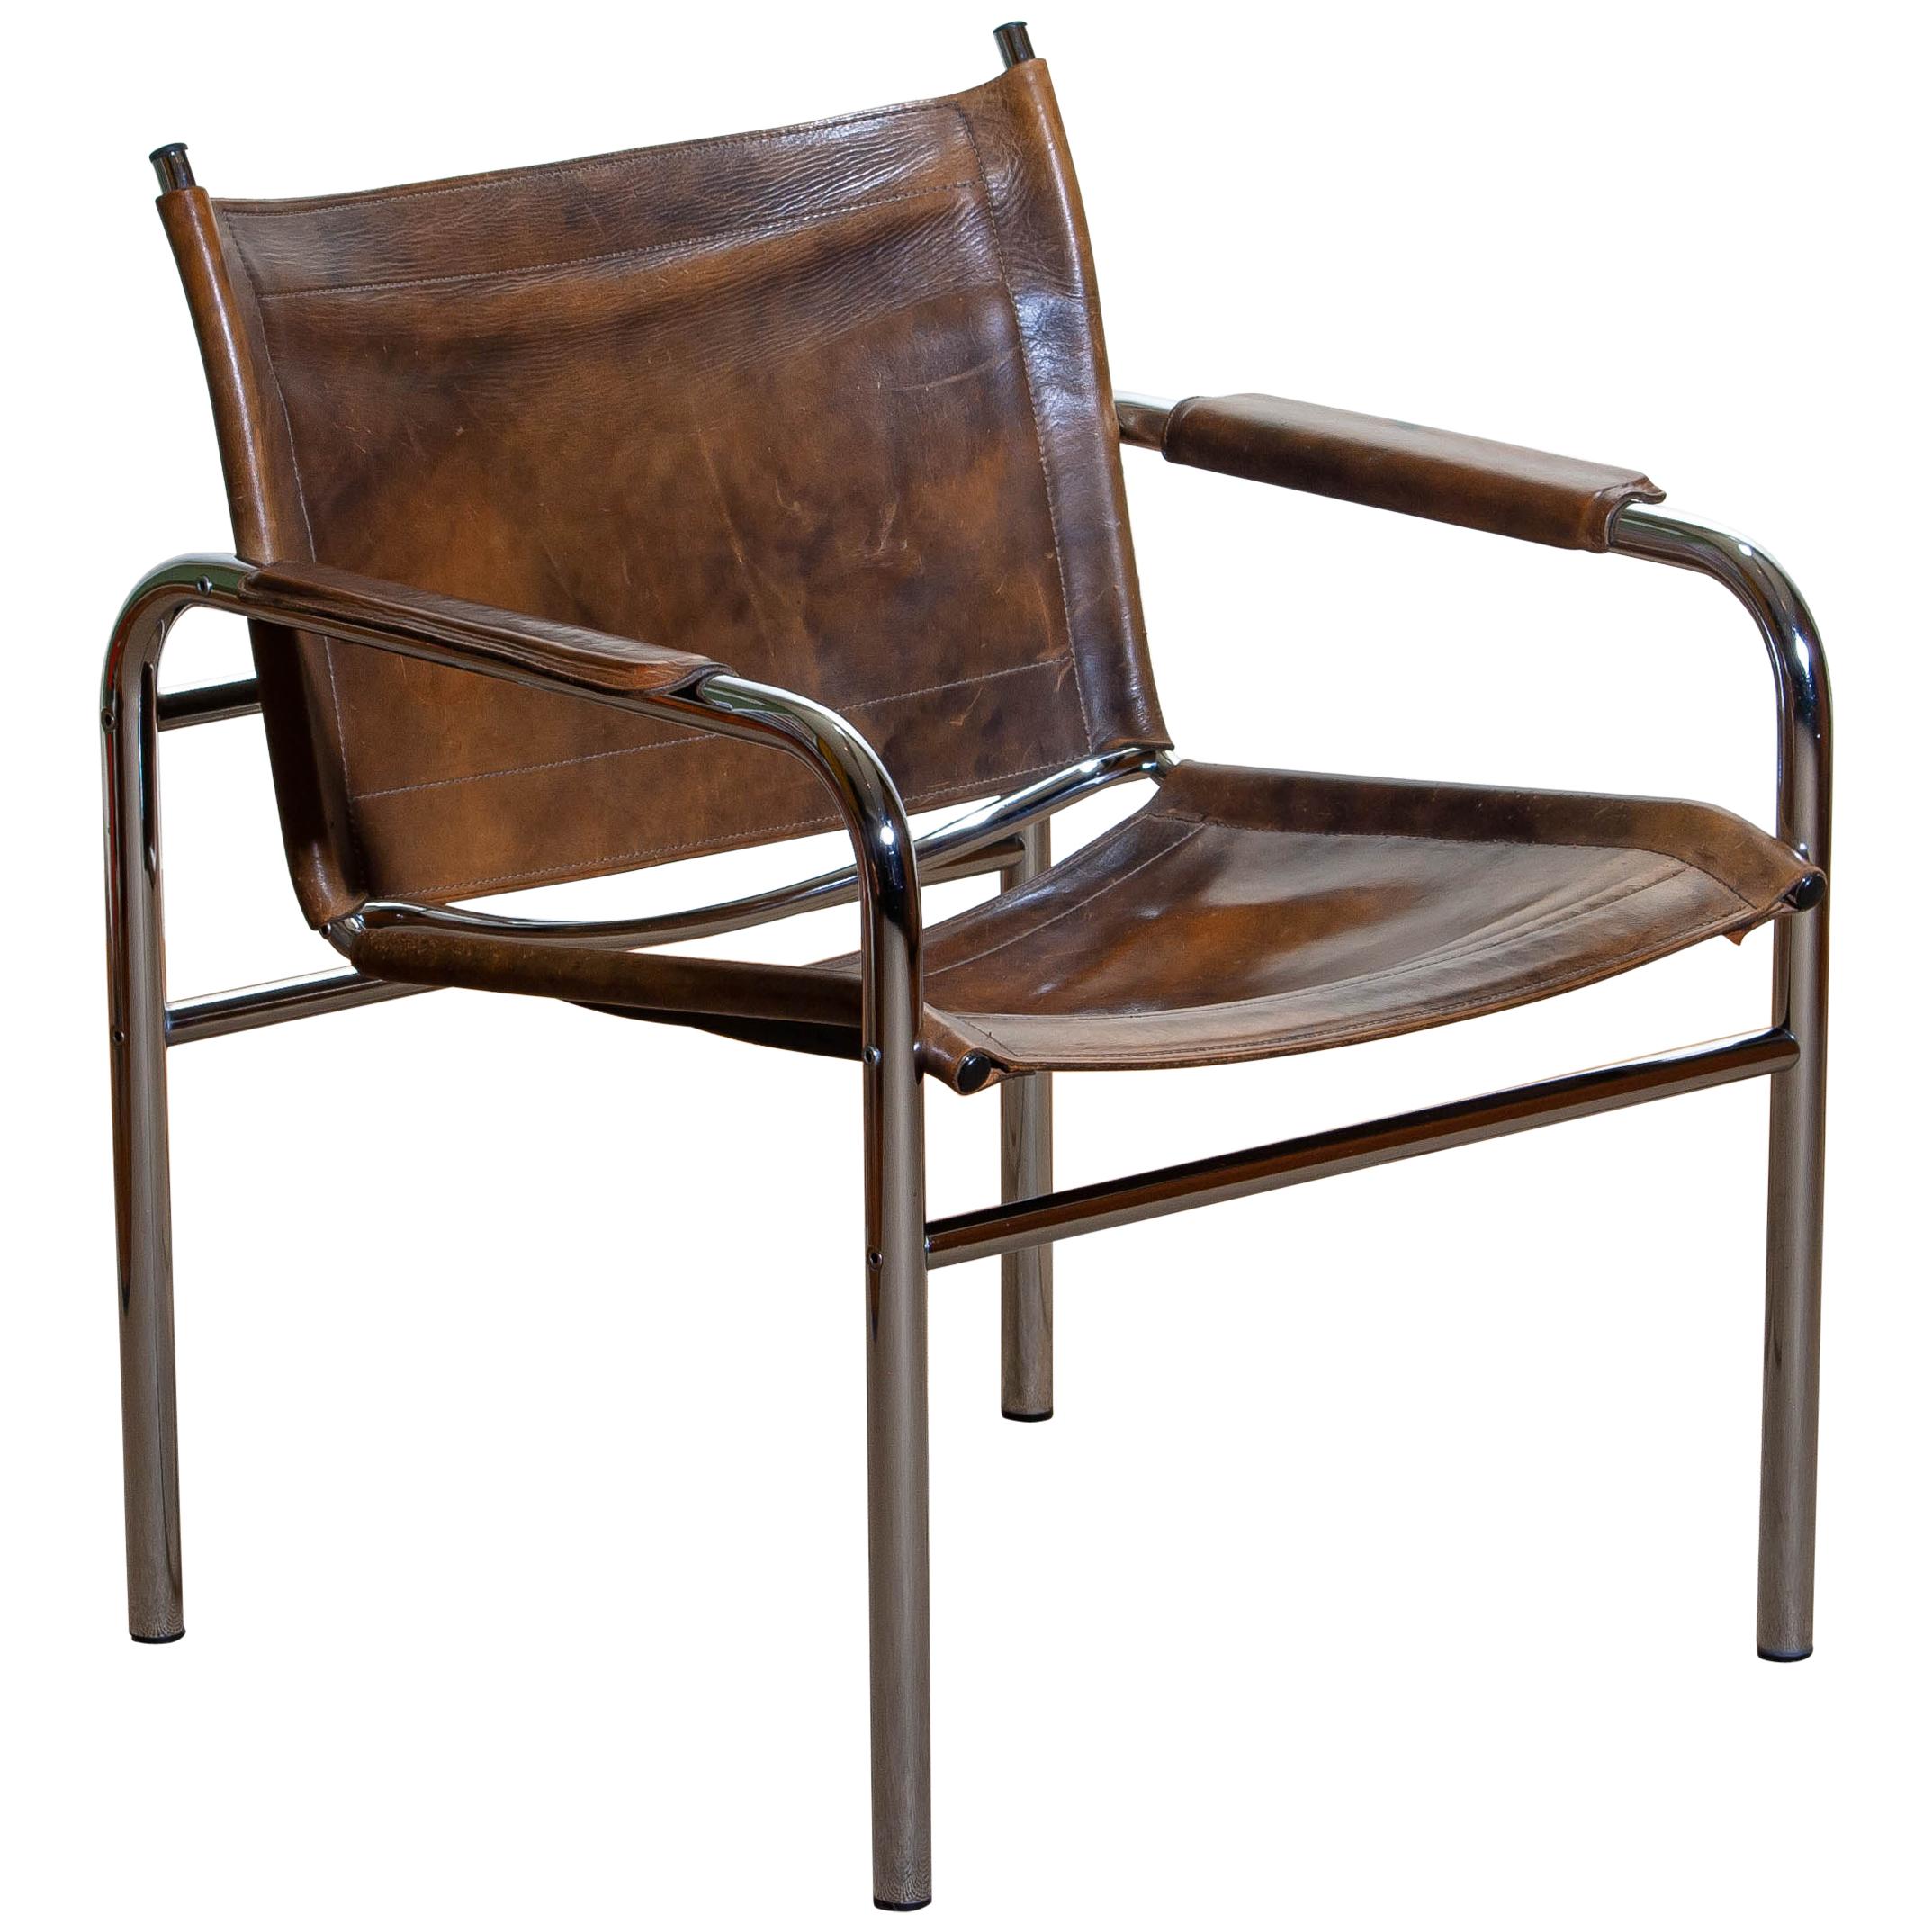 1980s Leather and Tubular Steel Armchair by Tord Bjorklund, Sweden